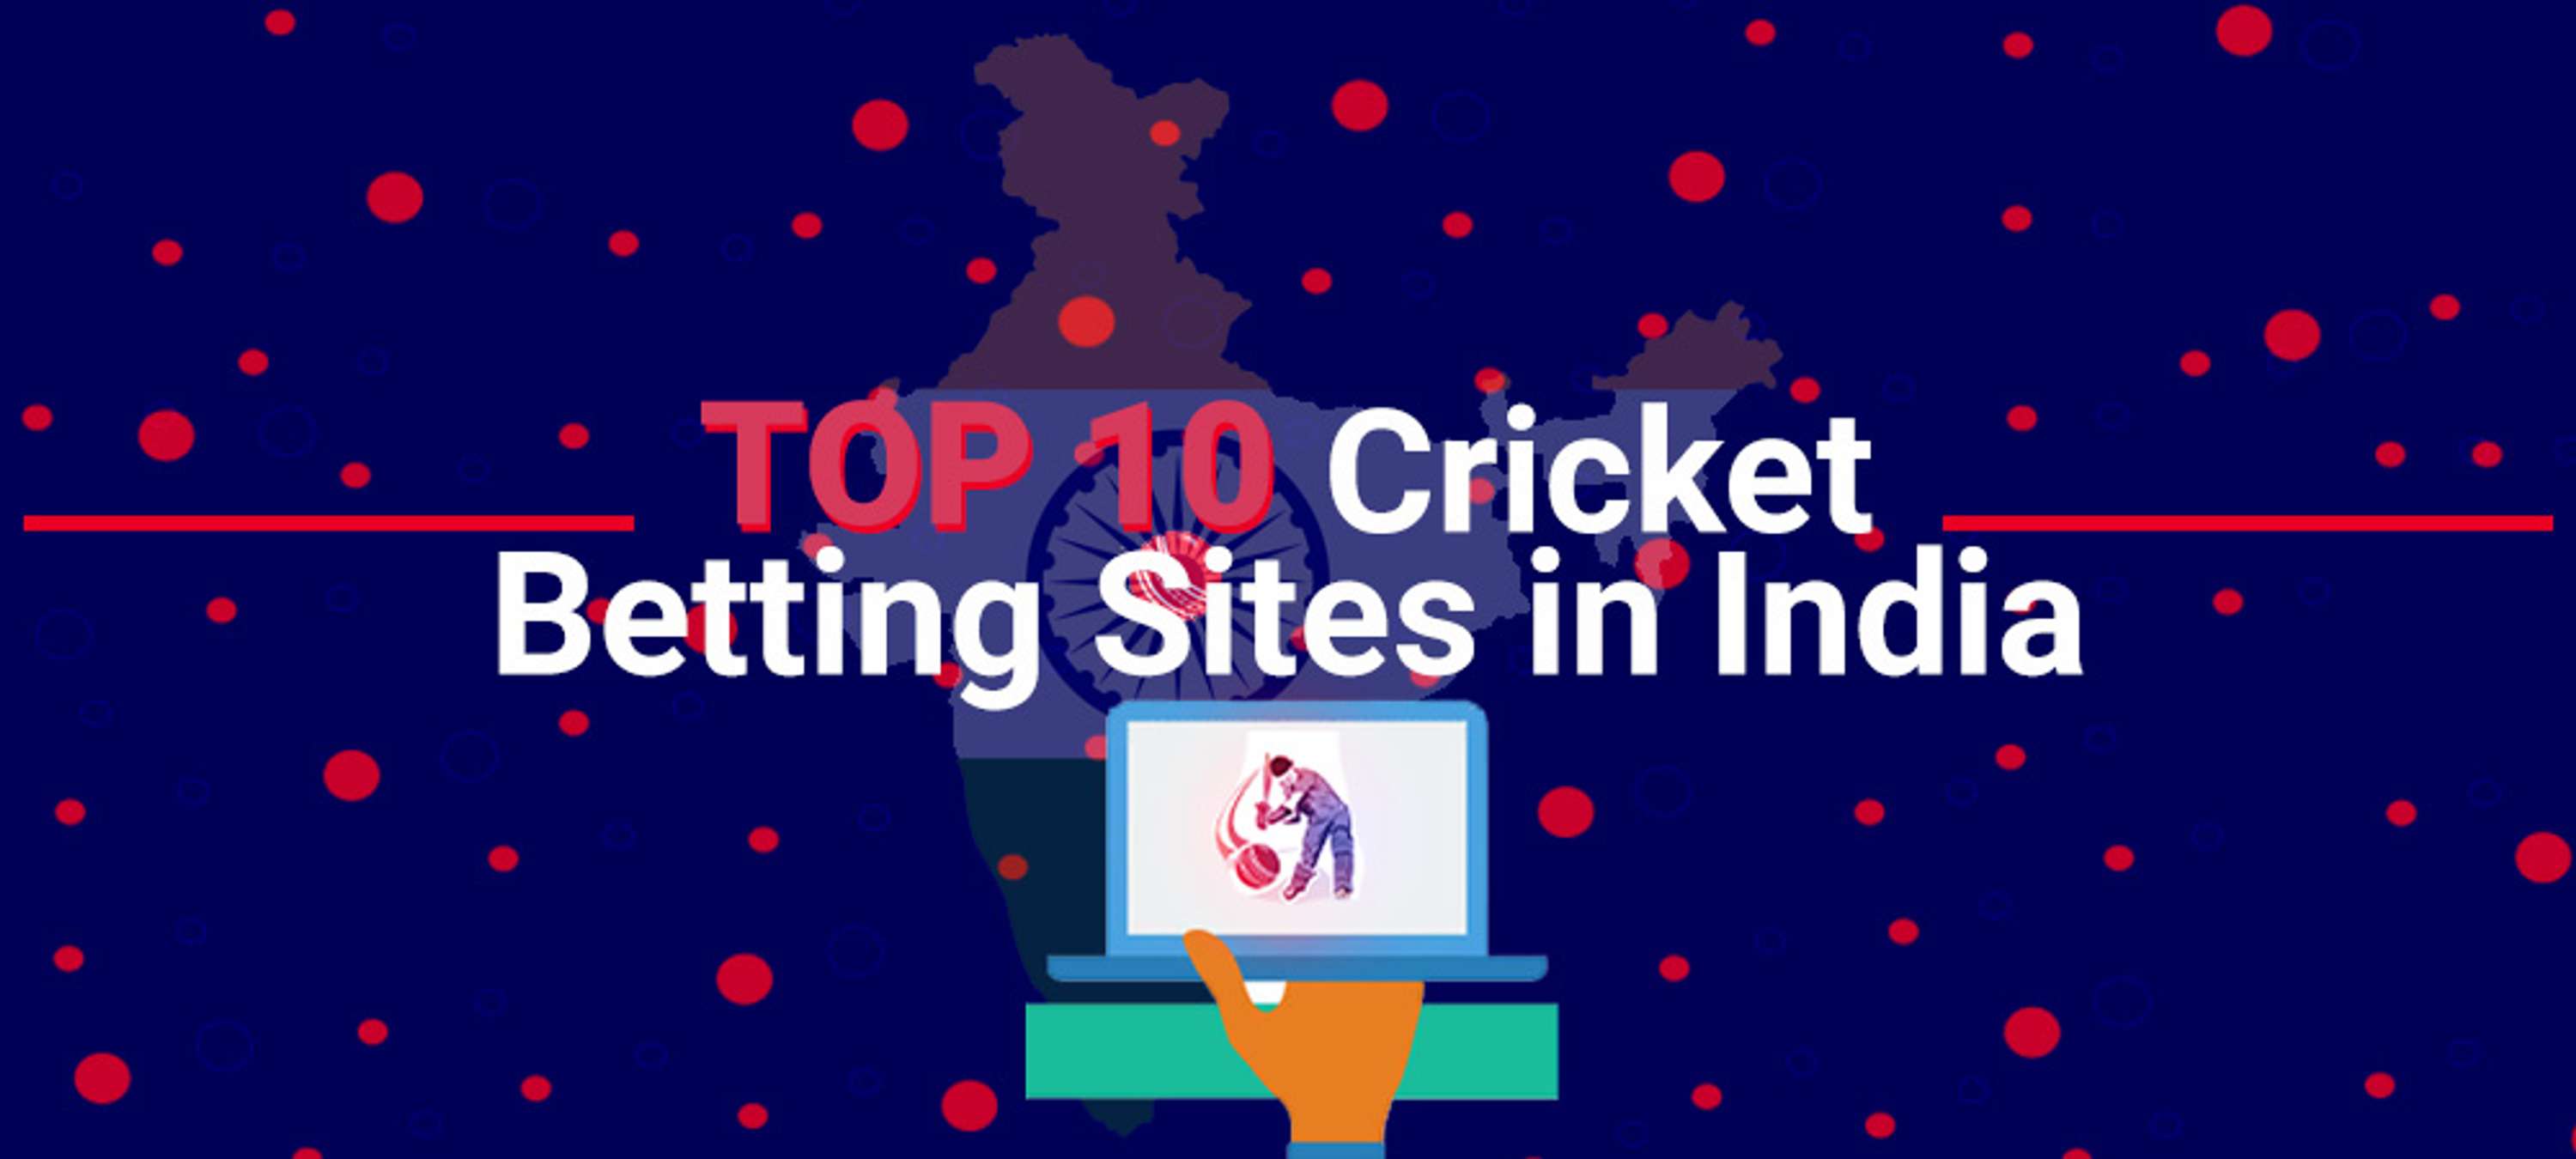 Top Betting Site In India | India Top Betting Site - Namoonlinebook by Namoonlinebook Hub